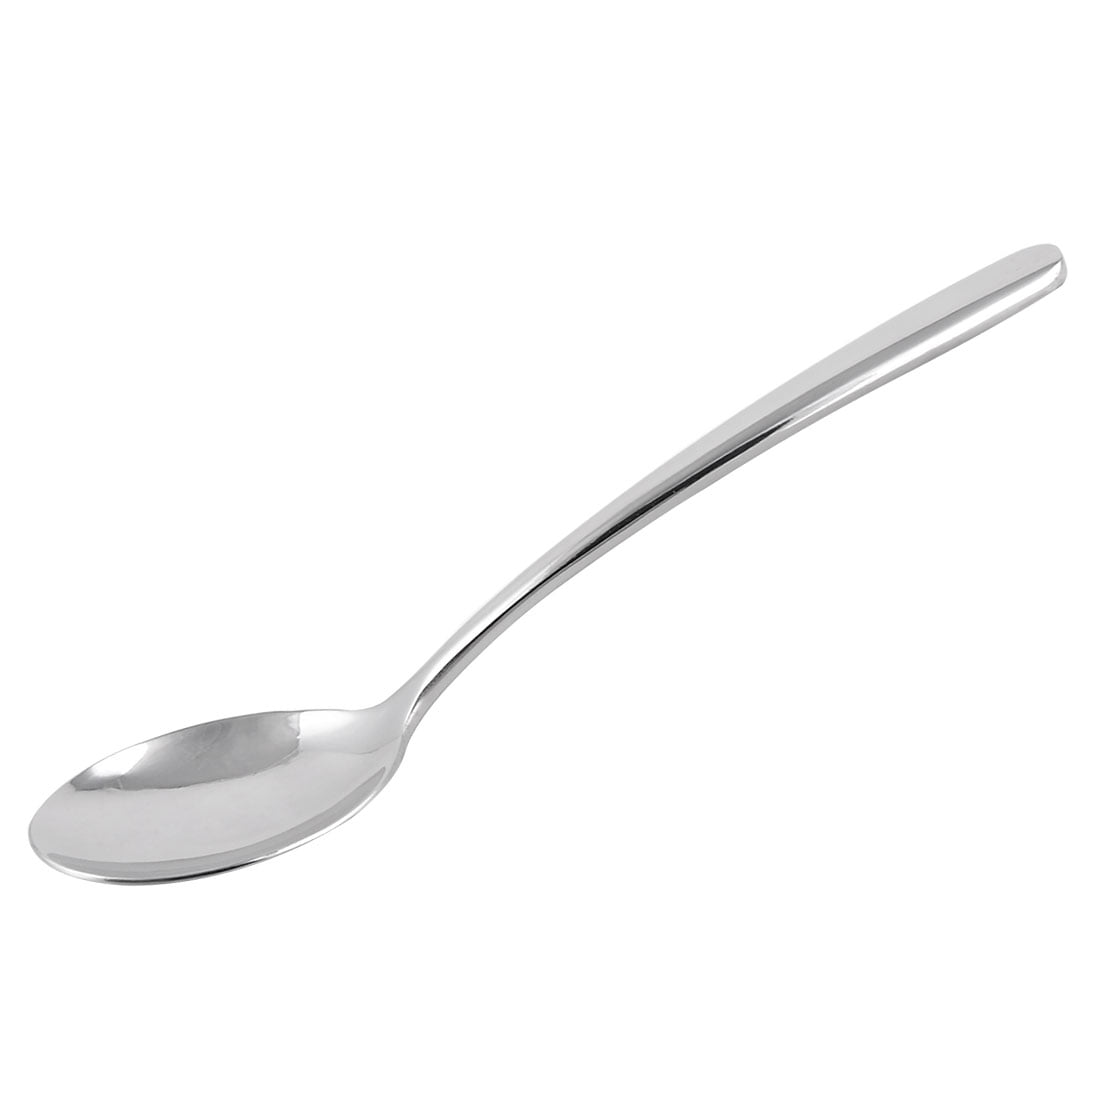 All-Clad T230 Stainless Steel Cook Serving Spoon Silver 